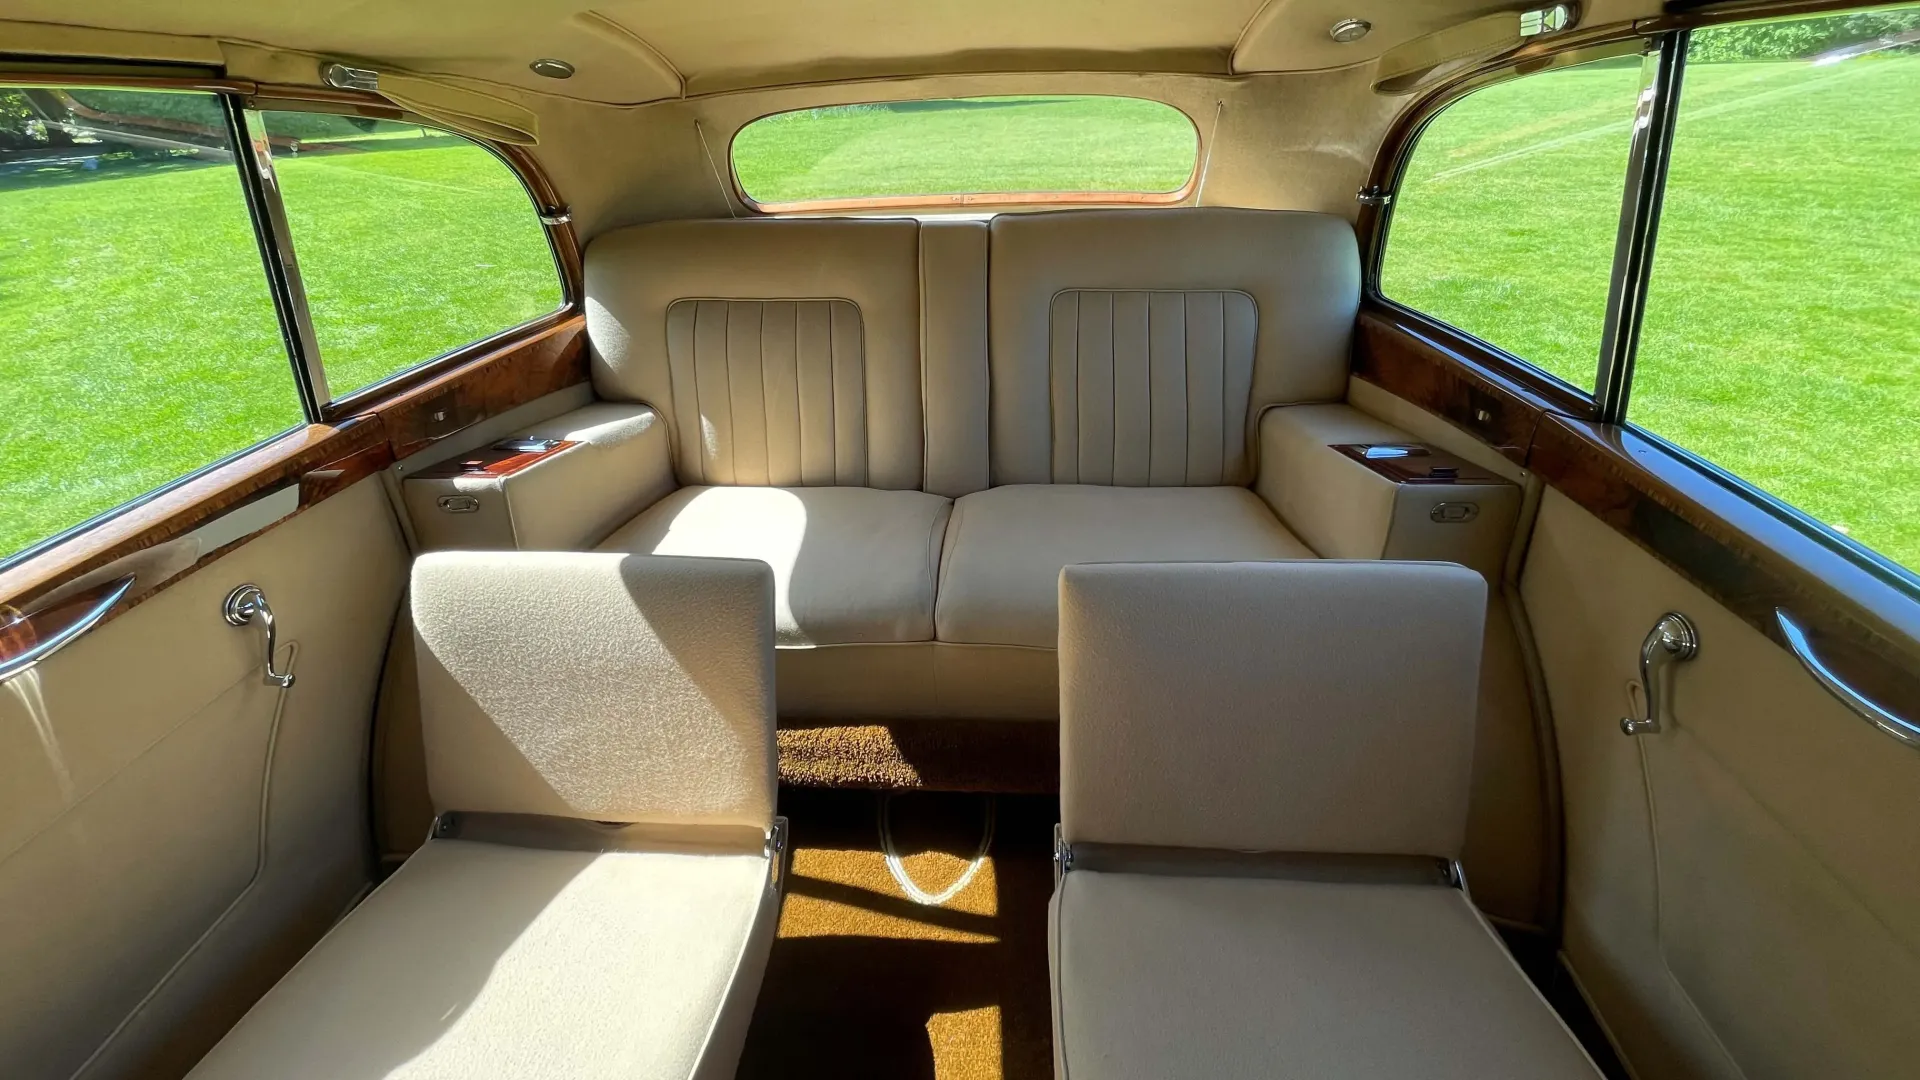 rear cabin of Rolls-Royce silver Wraith LWB with casual seats up showing seats for up to 5 passengers